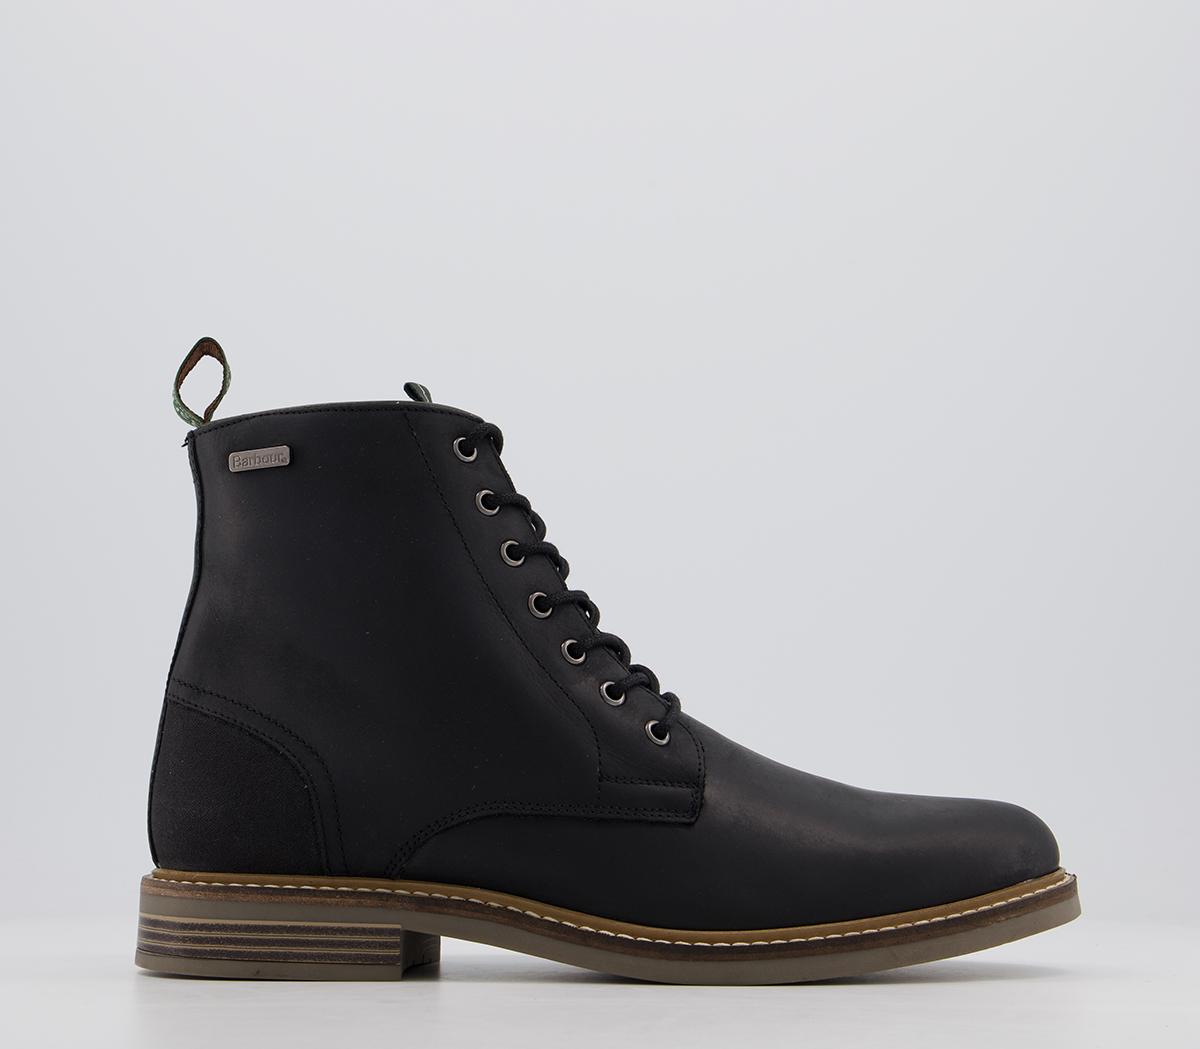 Seaham Lace Up Boots